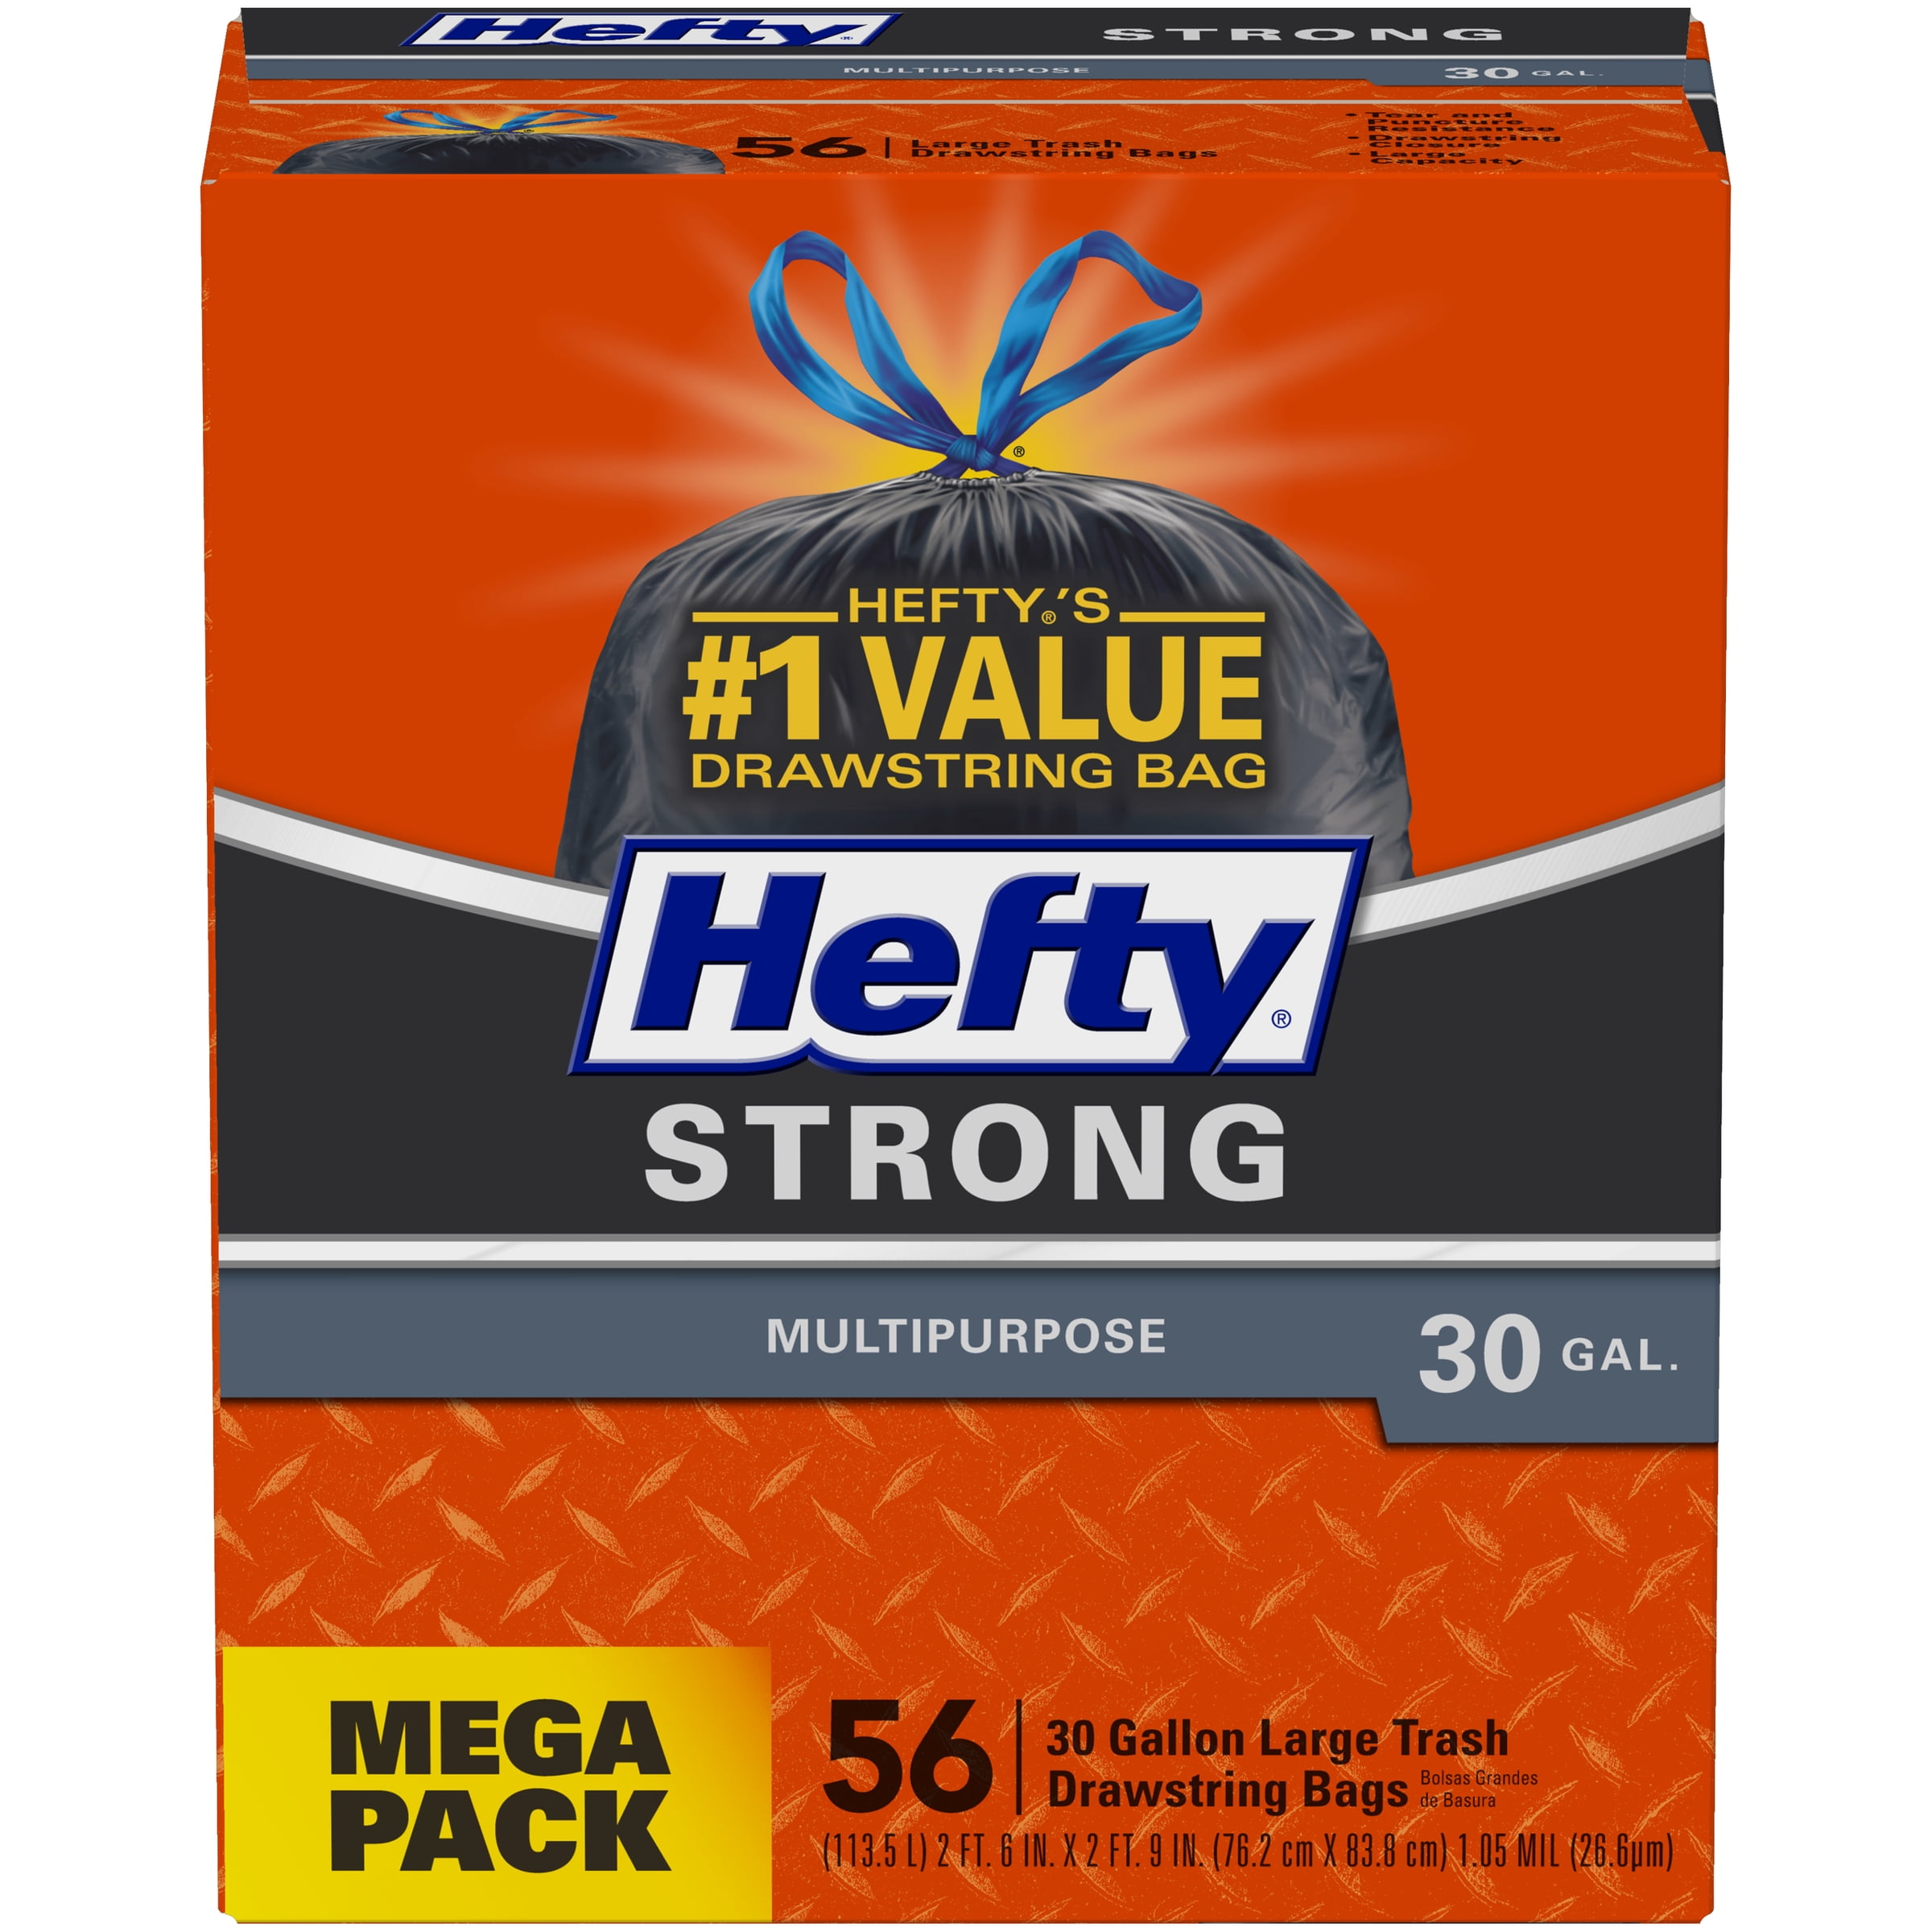 Can Liner Hefty Strong Large Trash/Garbage Bags